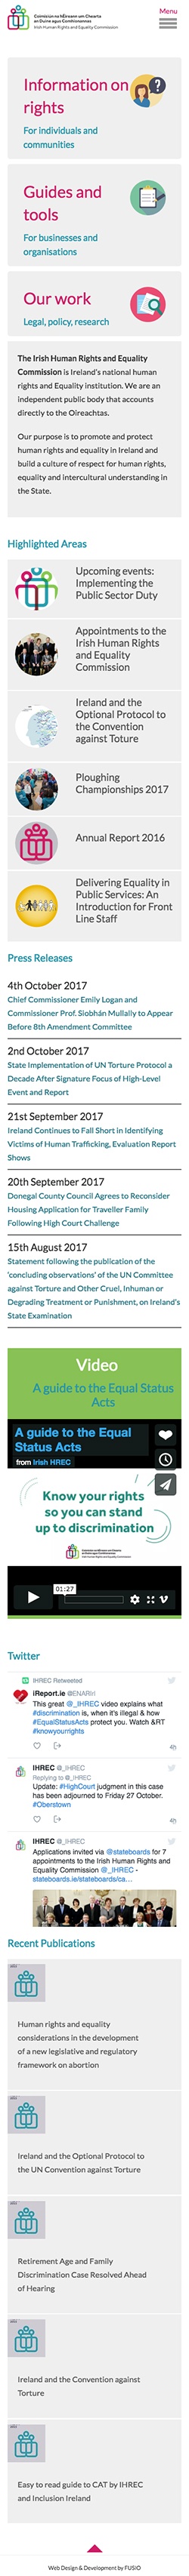 Irish Human Rights and Equality Commission